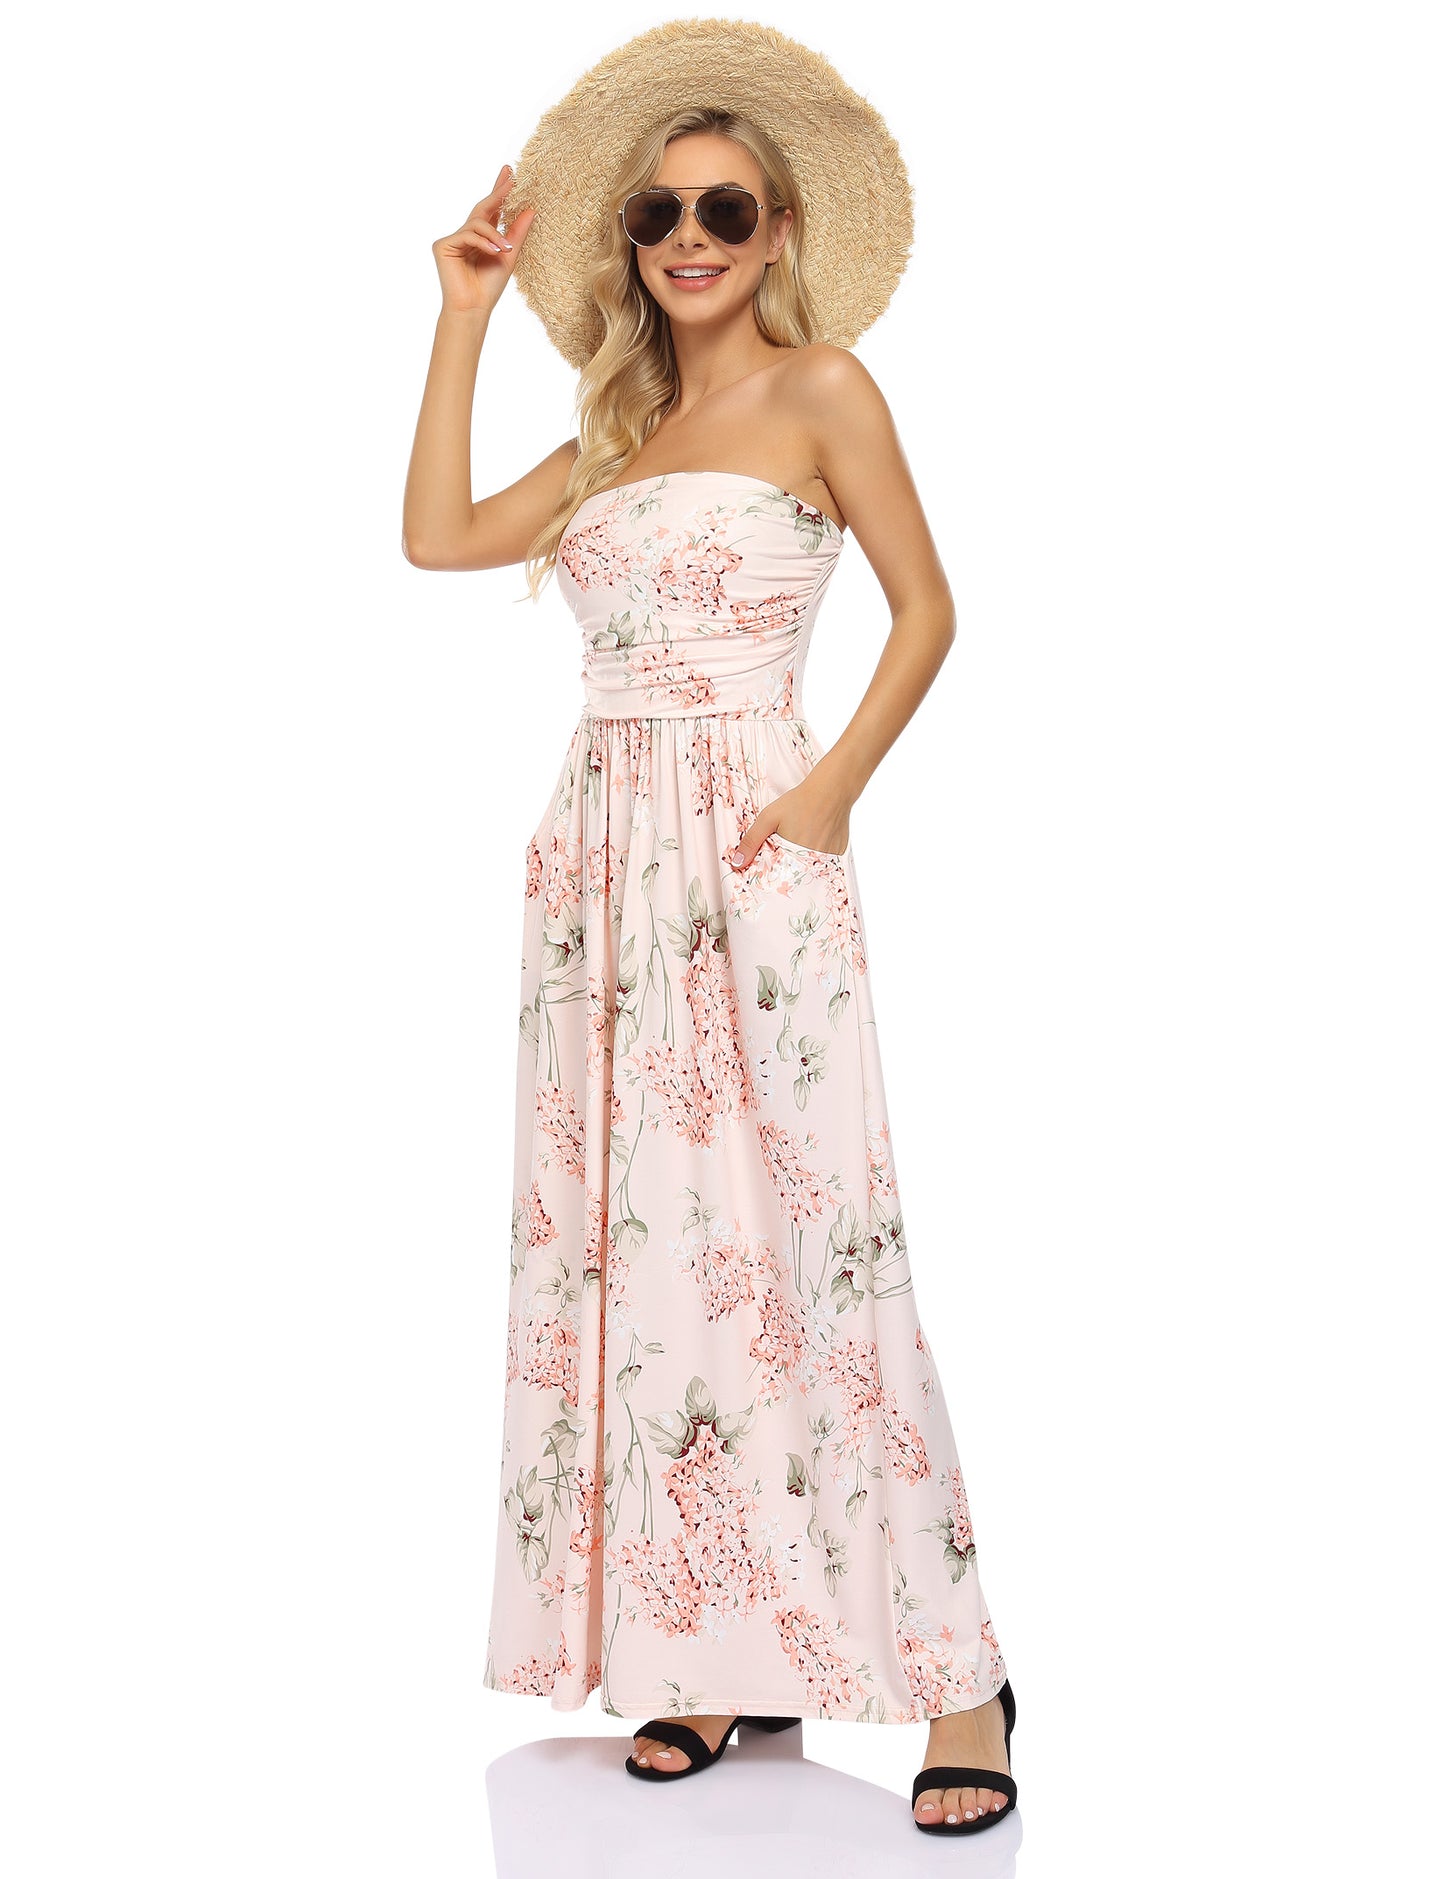 YESFASHION Women's Strapless Graceful Floral Party Maxi Long Dress Apricot